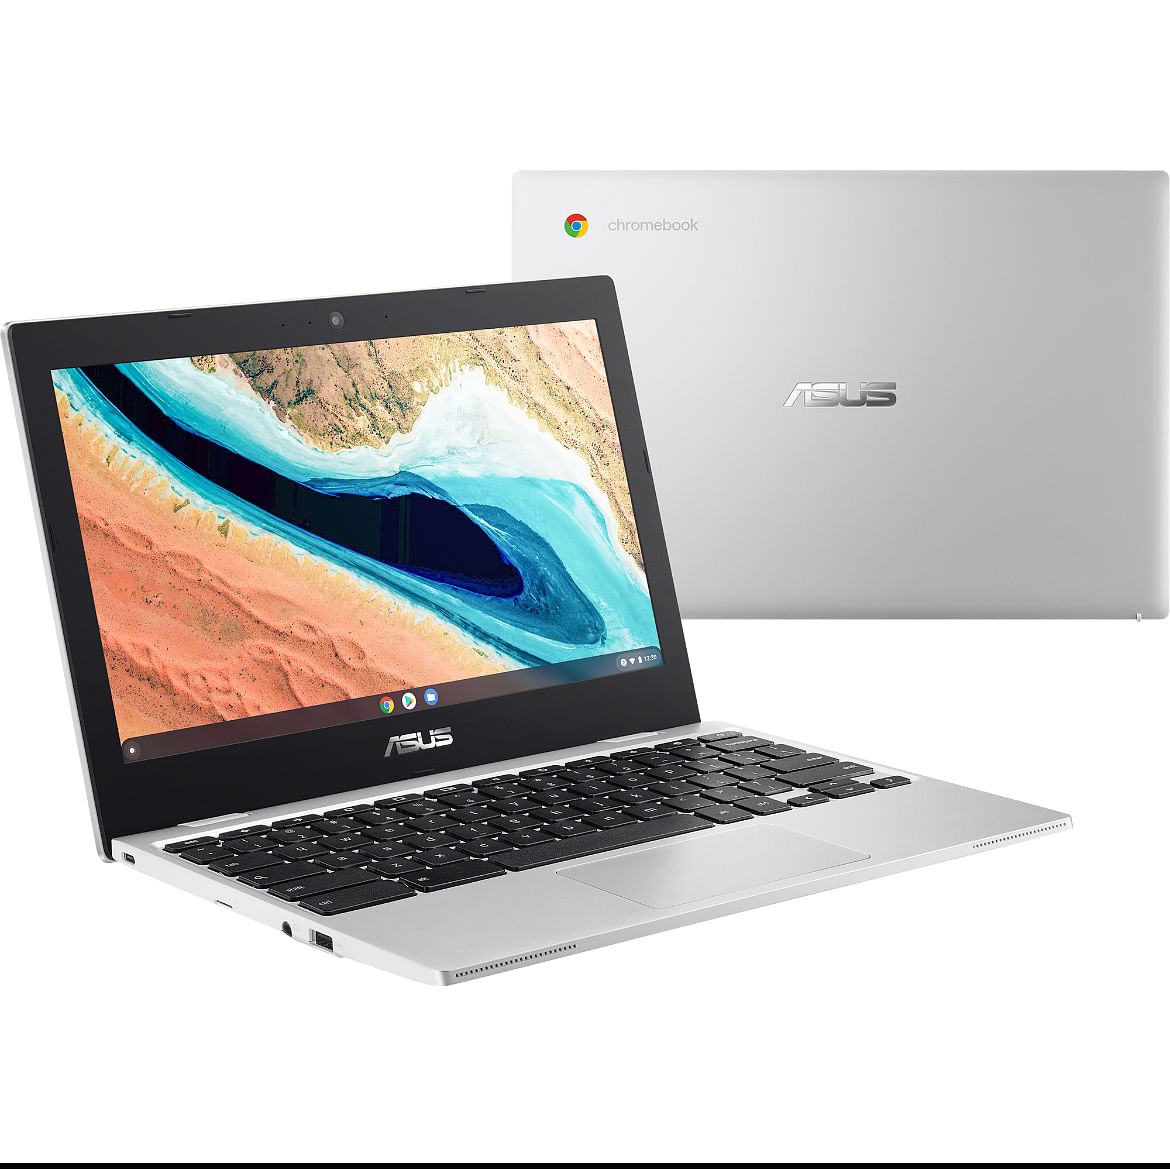 Gadgets Weekly: Asus Chromebook CX1101, Oppo Air Glass and more